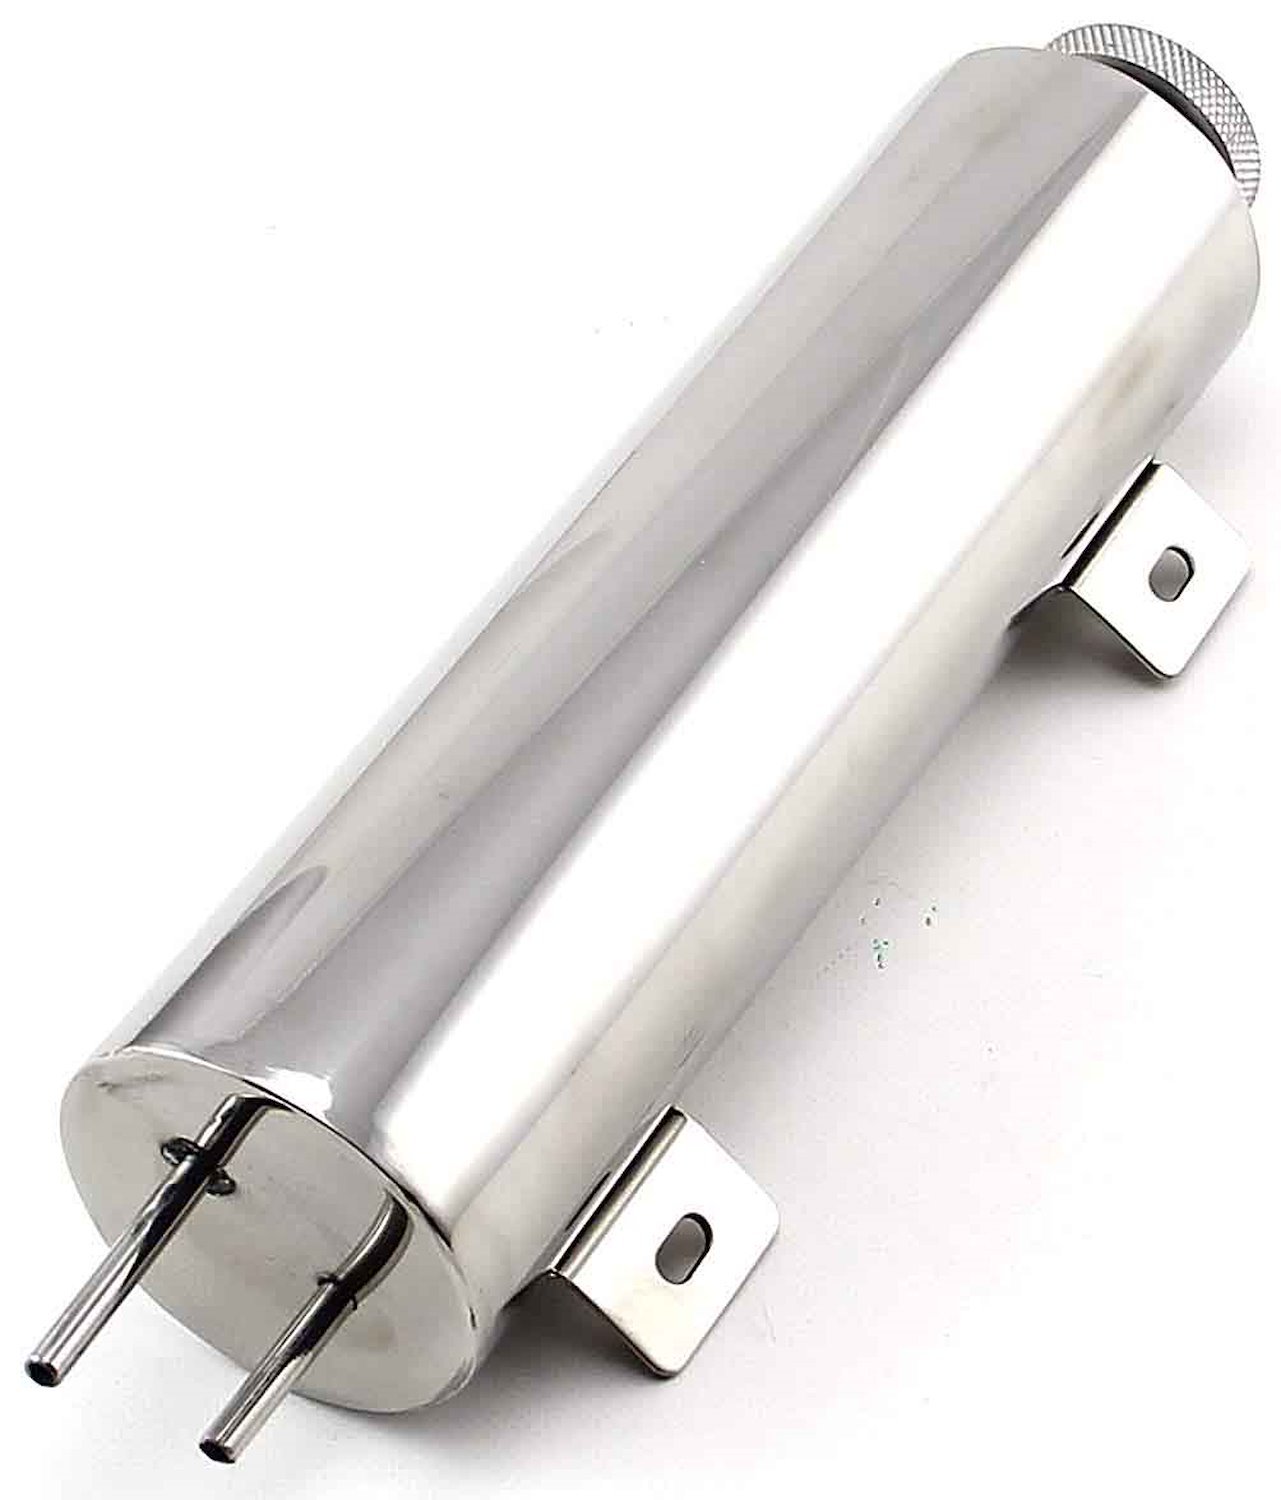 3 x 11 in. Stainless Steel Overflow Tank With Mounting Bracket Kit - Polished Finish